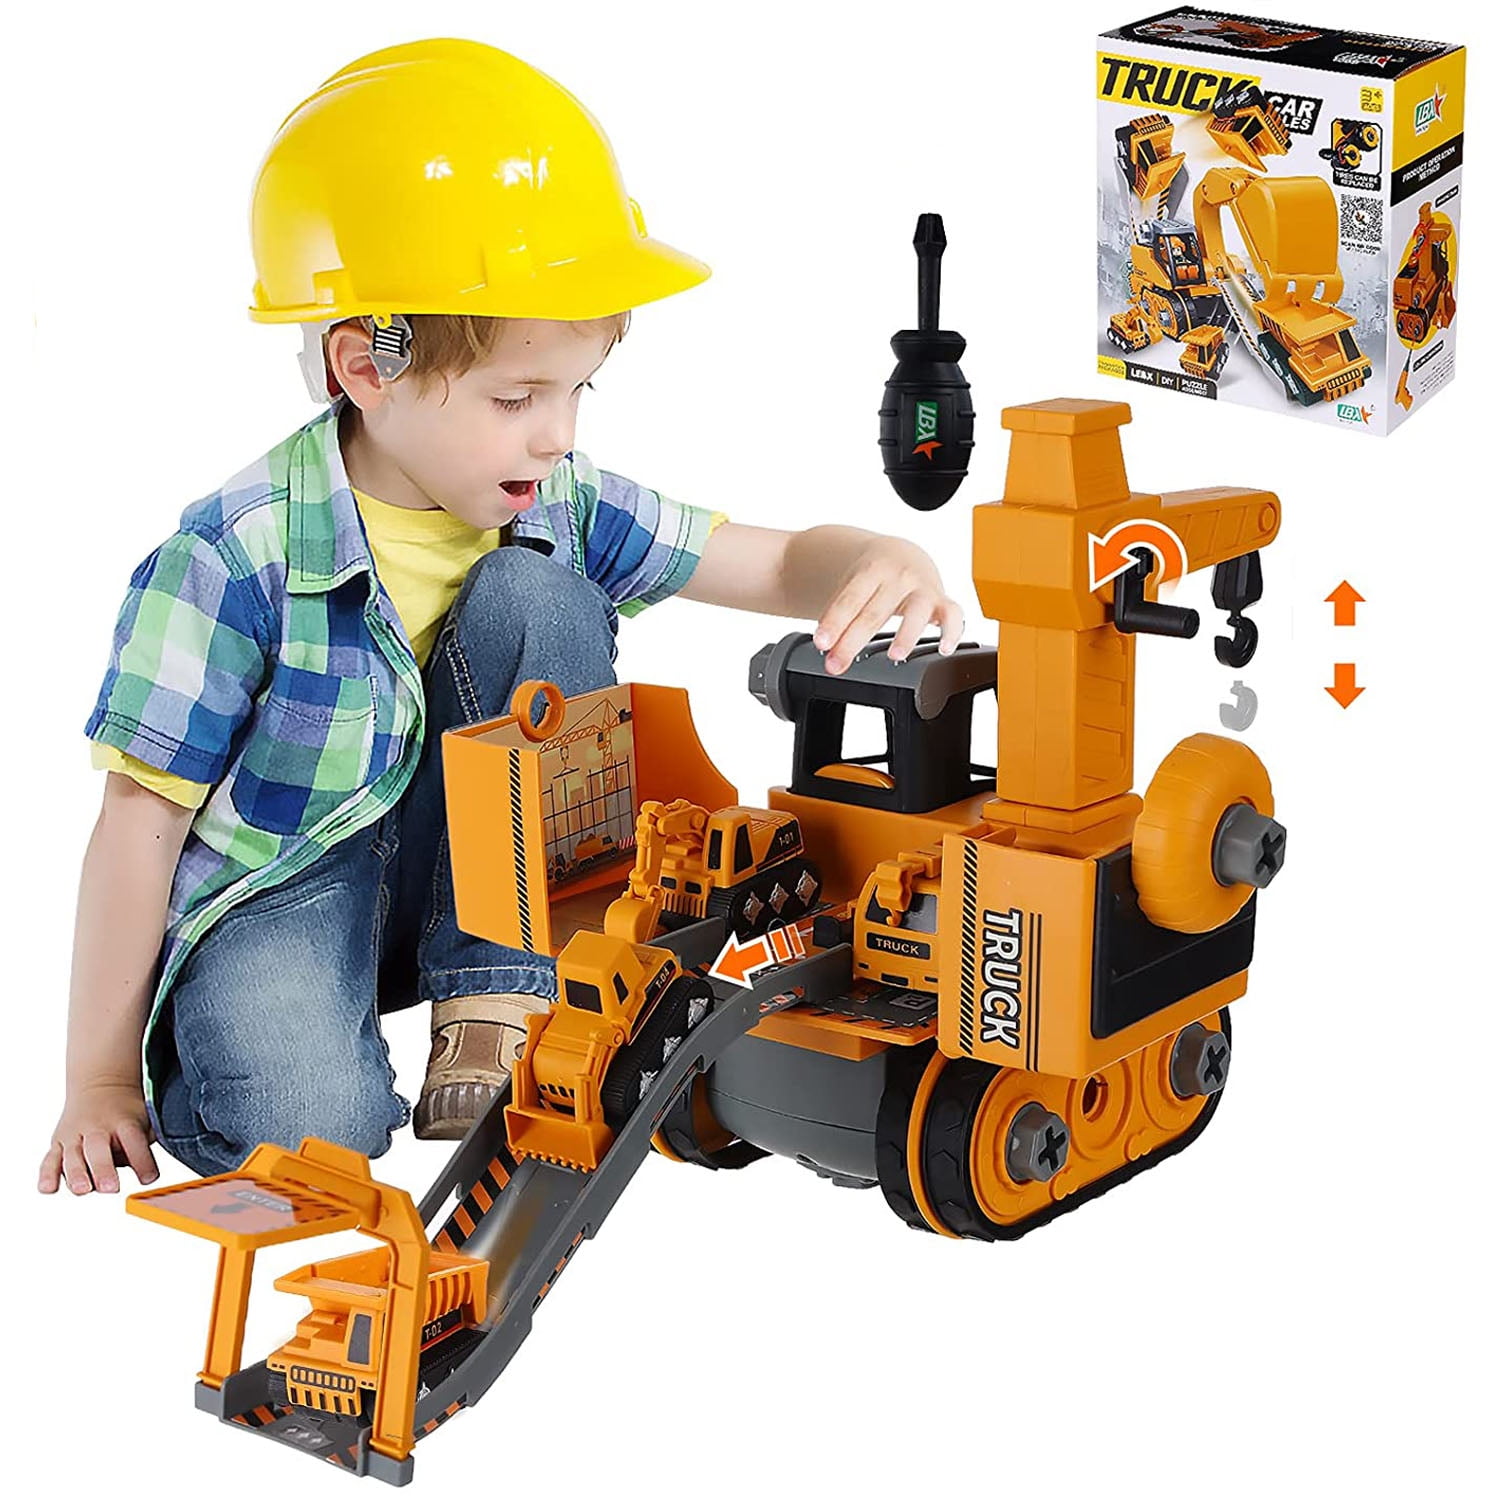 Insten 5 in 1 Take Apart Toy Robot & Truck Playset, Engineering Stem Project Kit for Kids, Blue